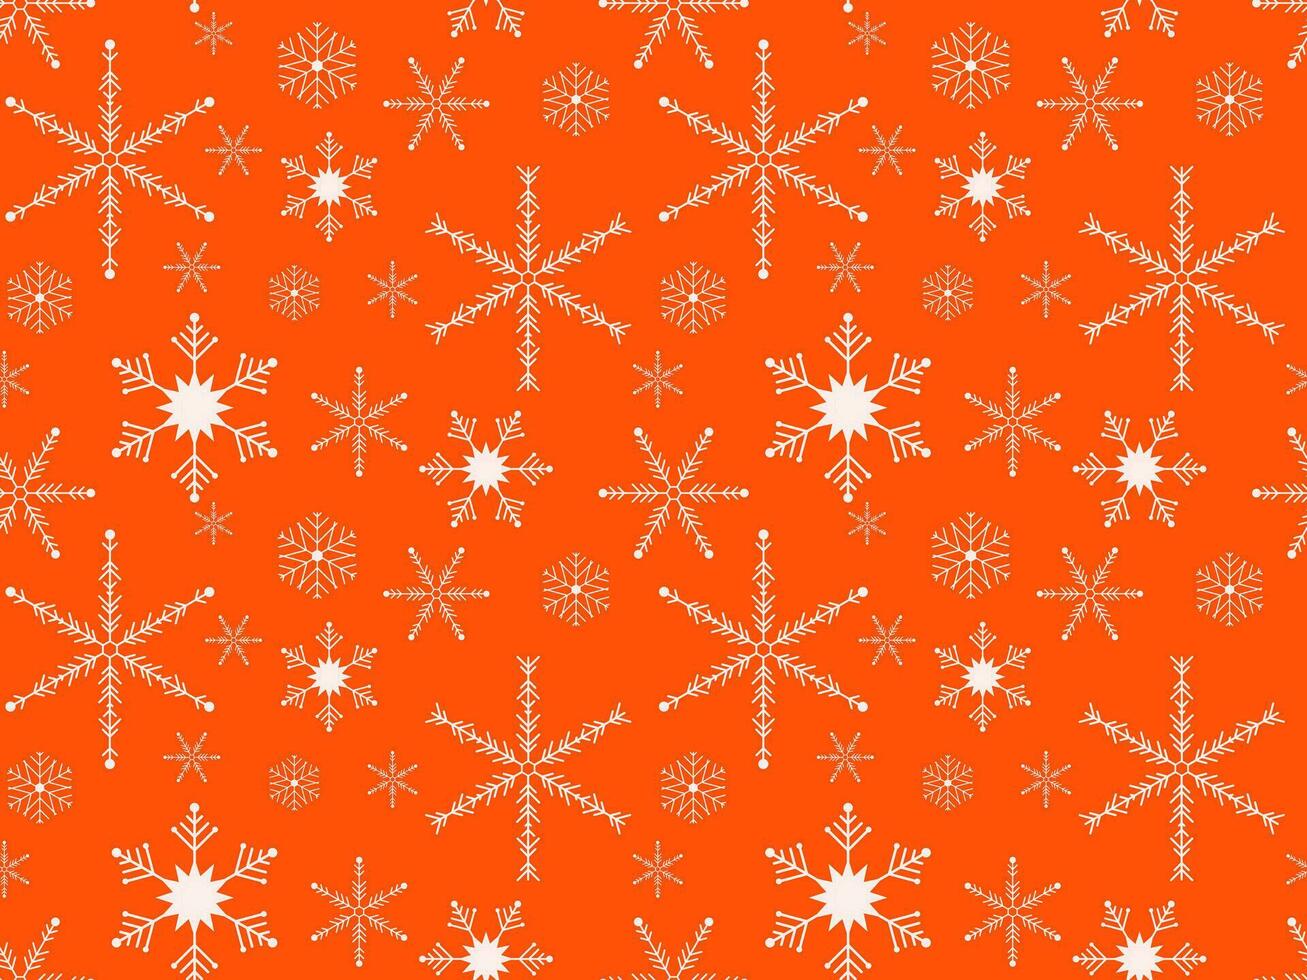 Red background with snowflakes. Winter seamless pattern for packaging, textiles, clothing vector